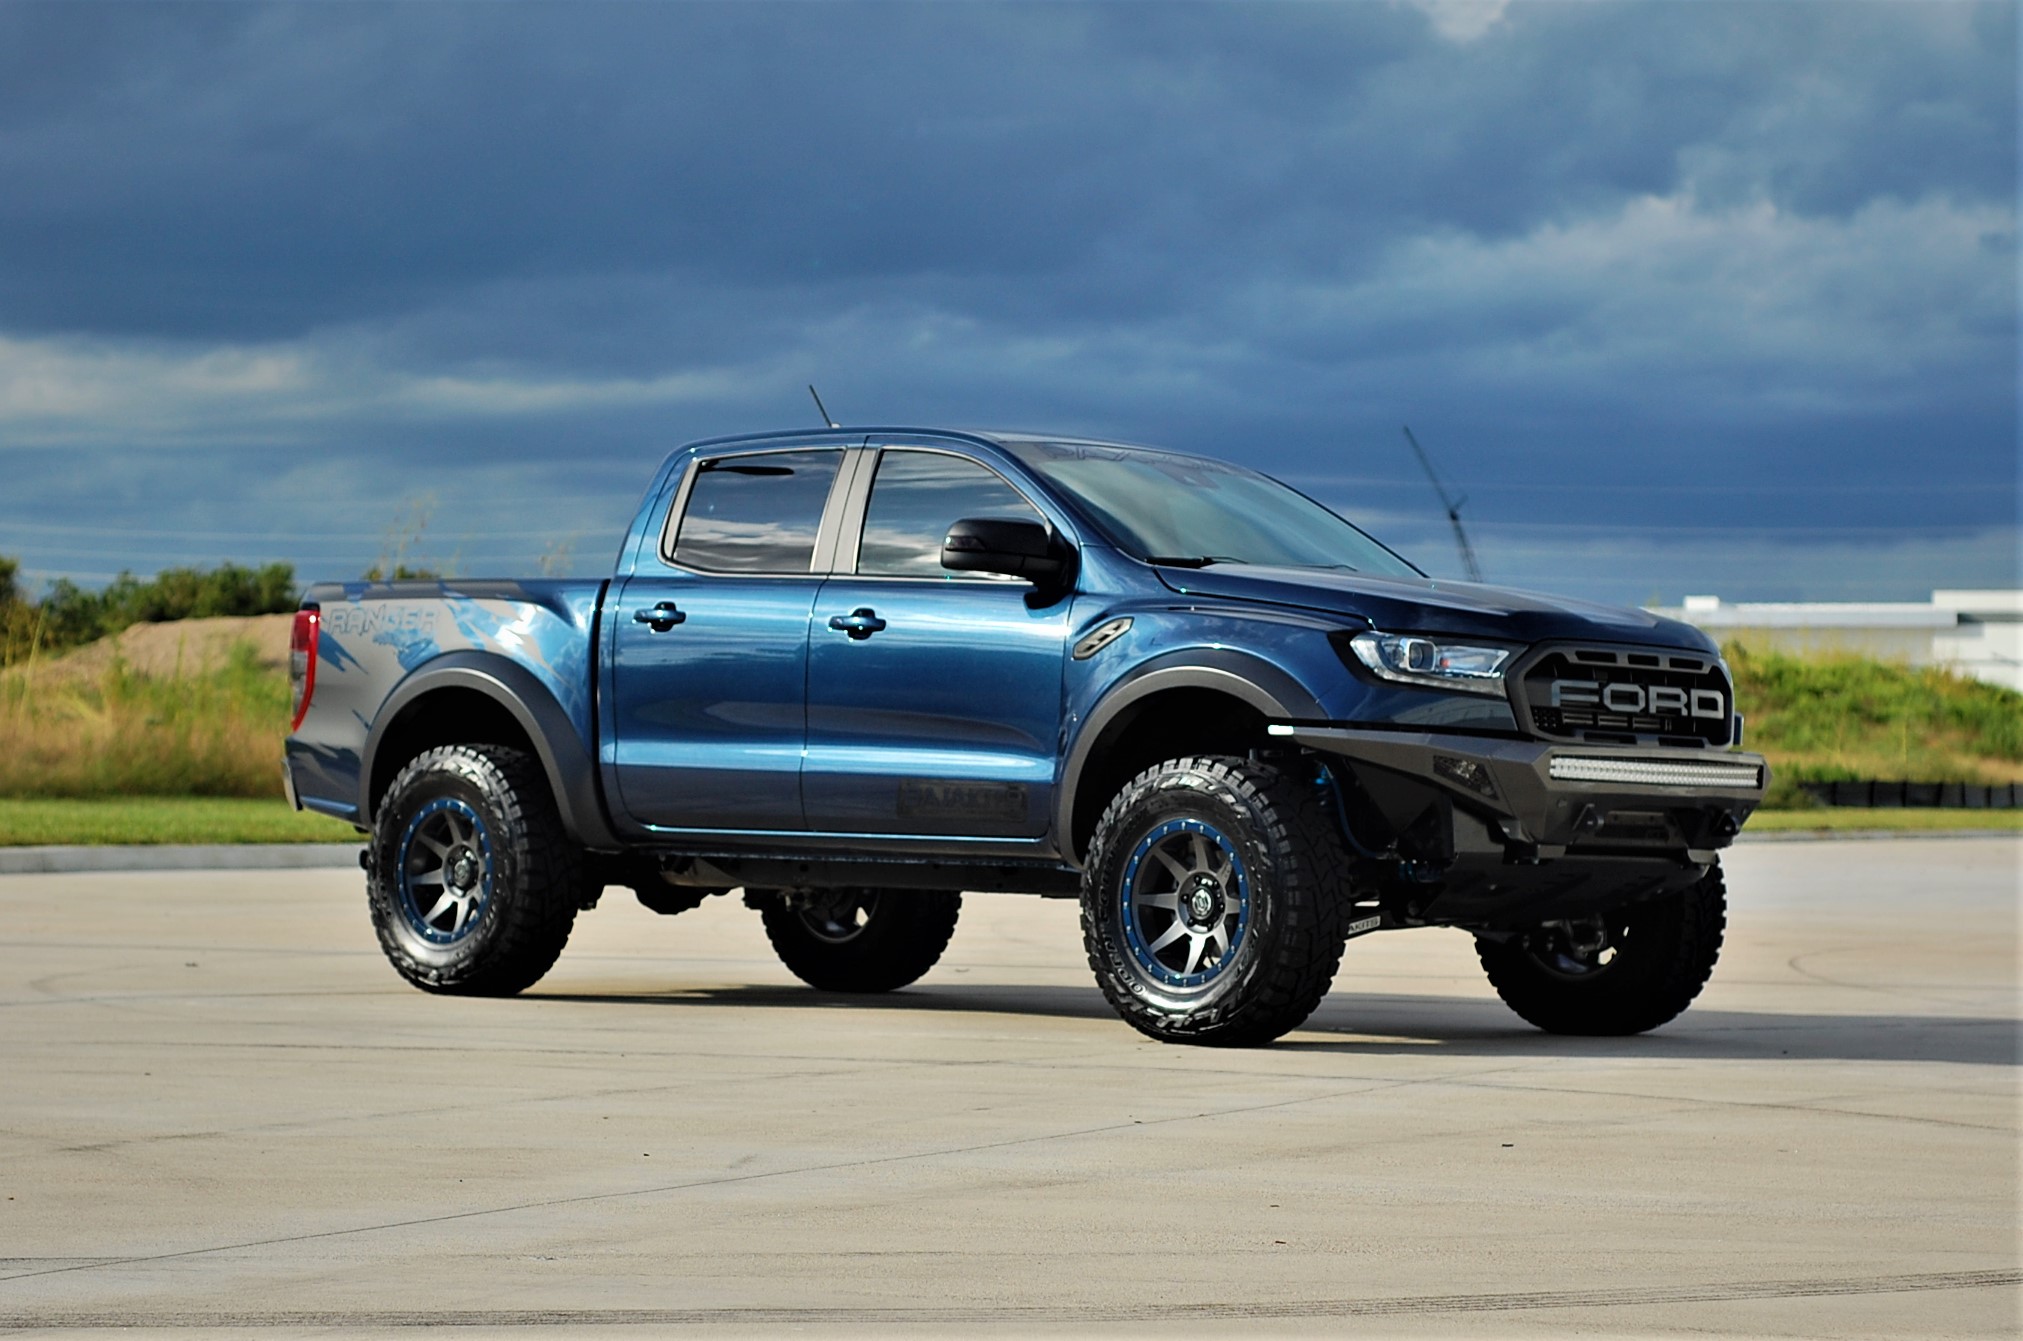 Ford Ranger Raptor replica by PaxPower unveiled at SEMA ...